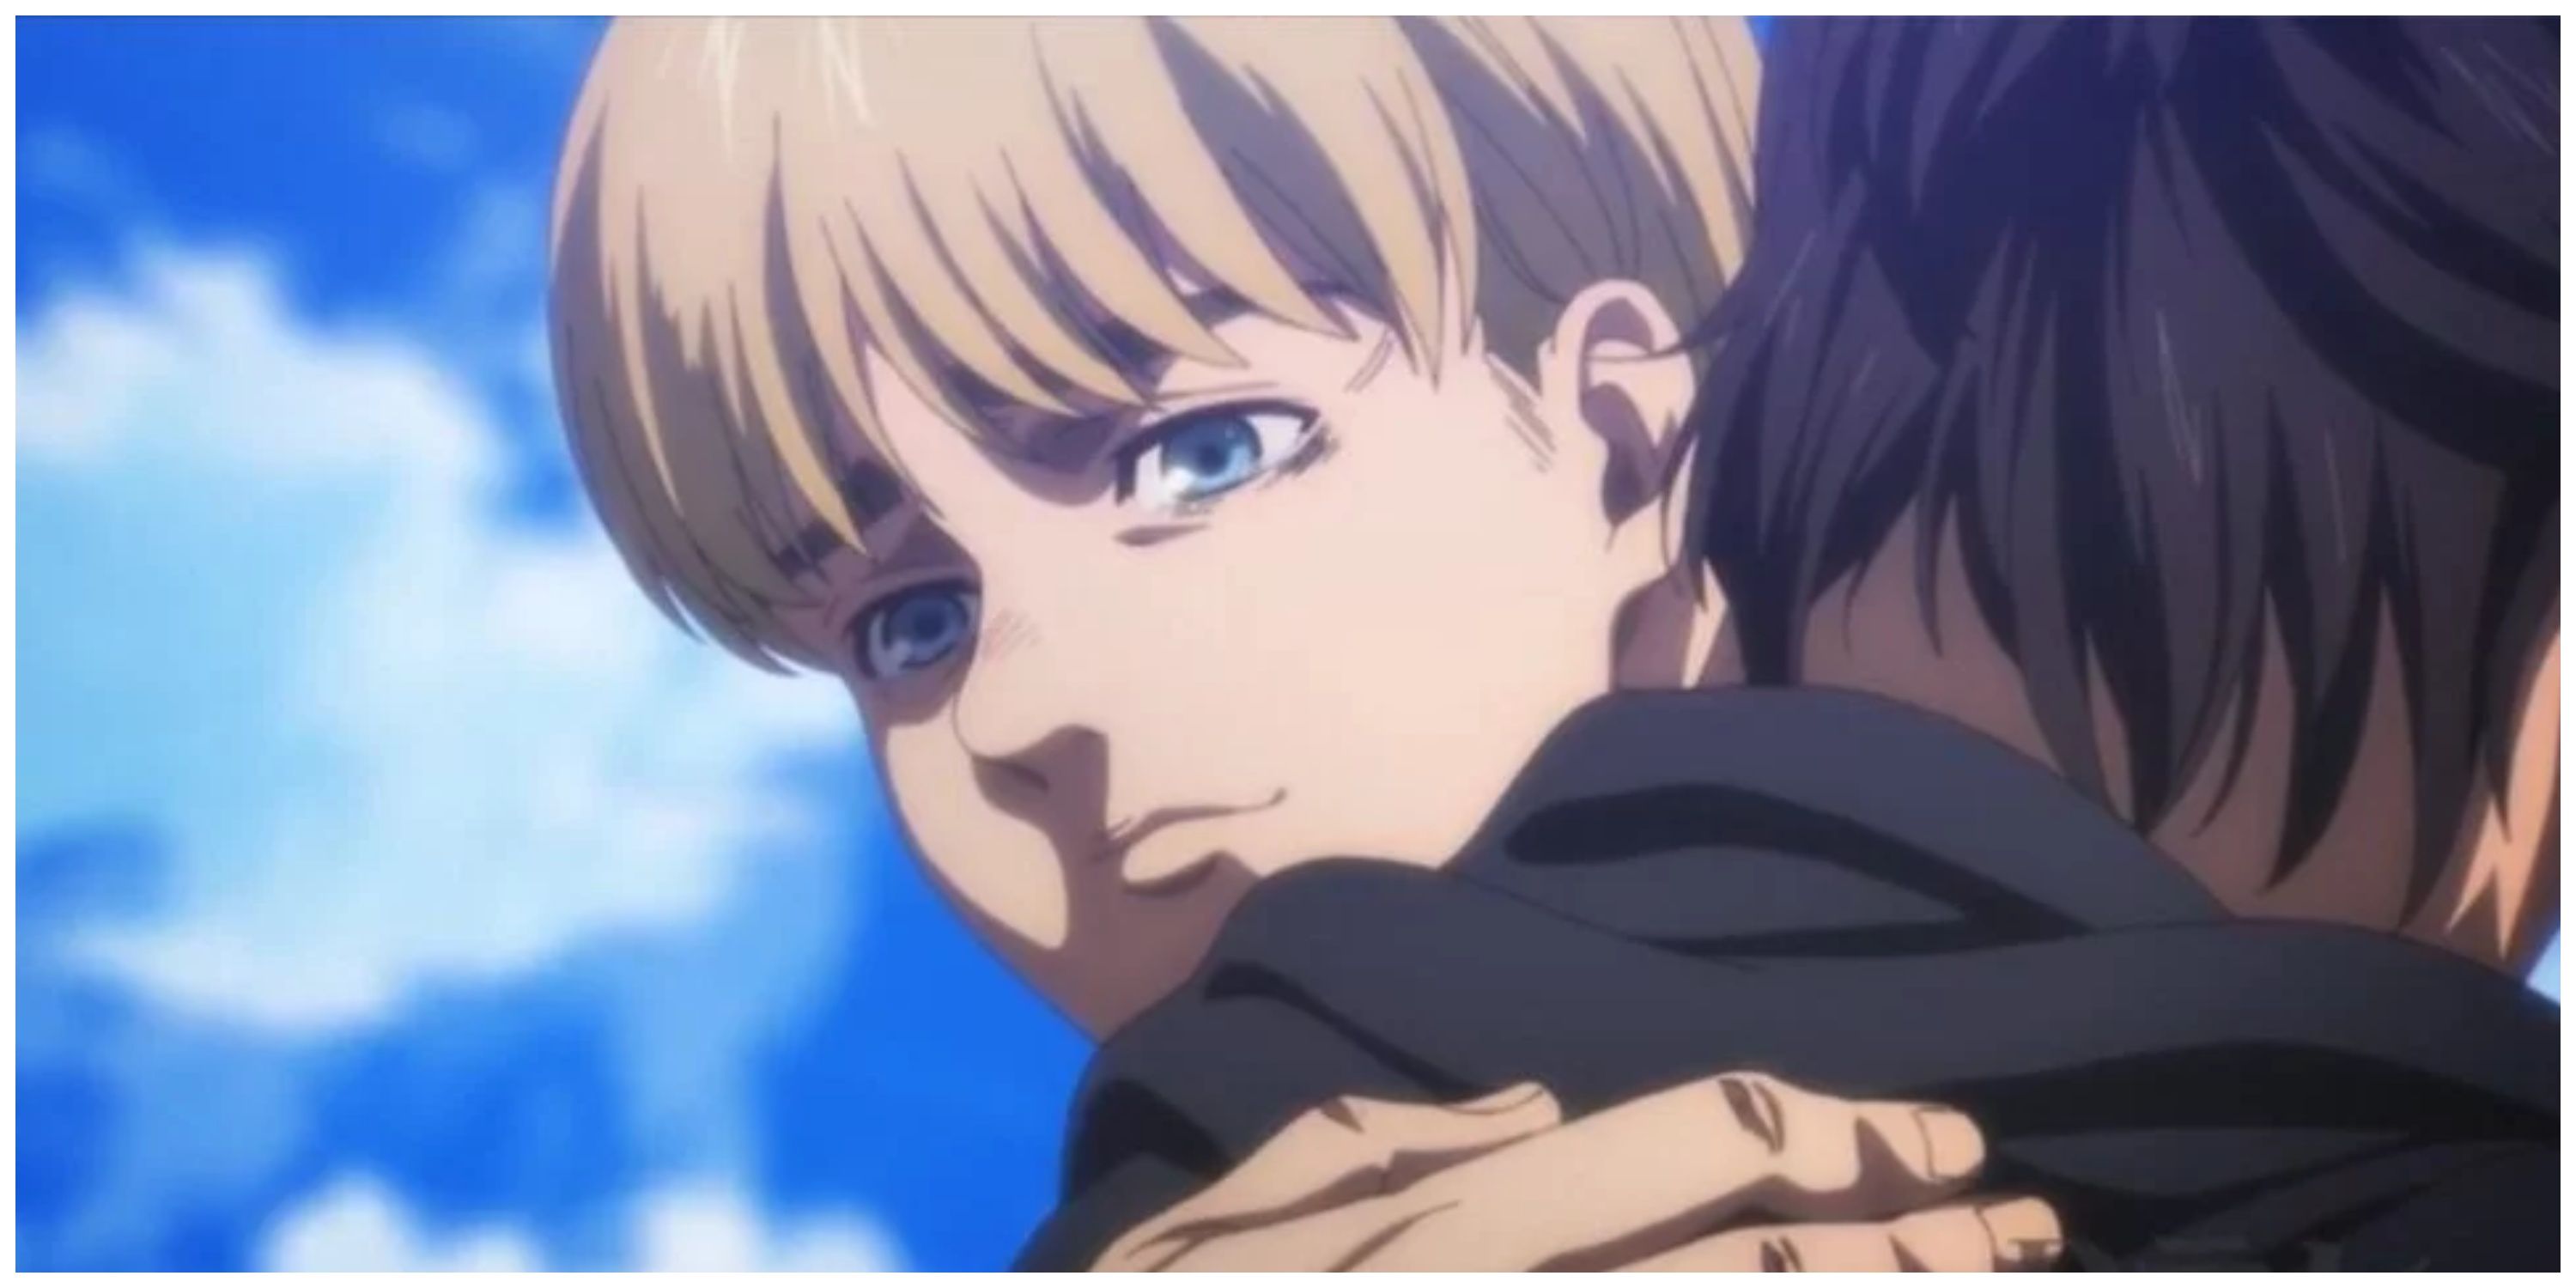 Eren and Armin hug in his dream AOT